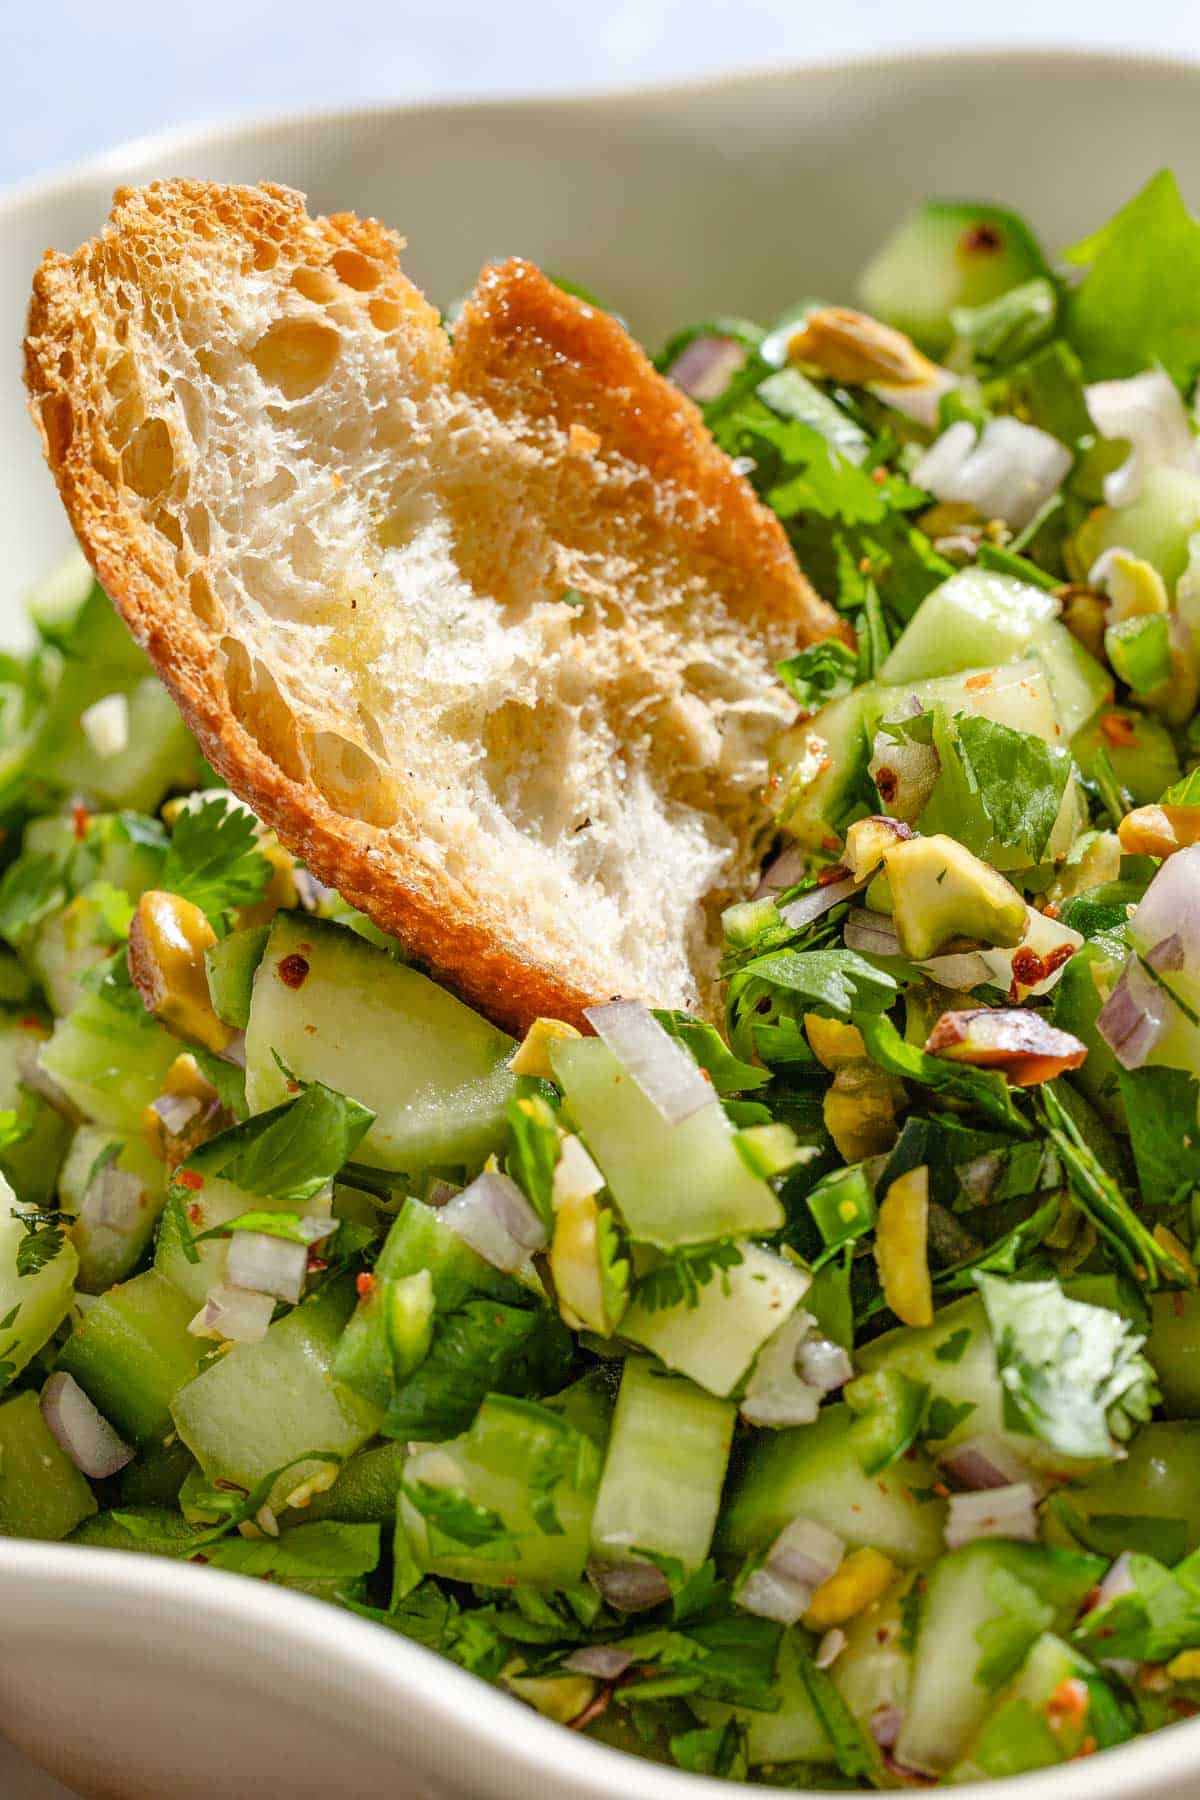 A close up of a bowl of cucumber salsa with a toasted baguette slice.